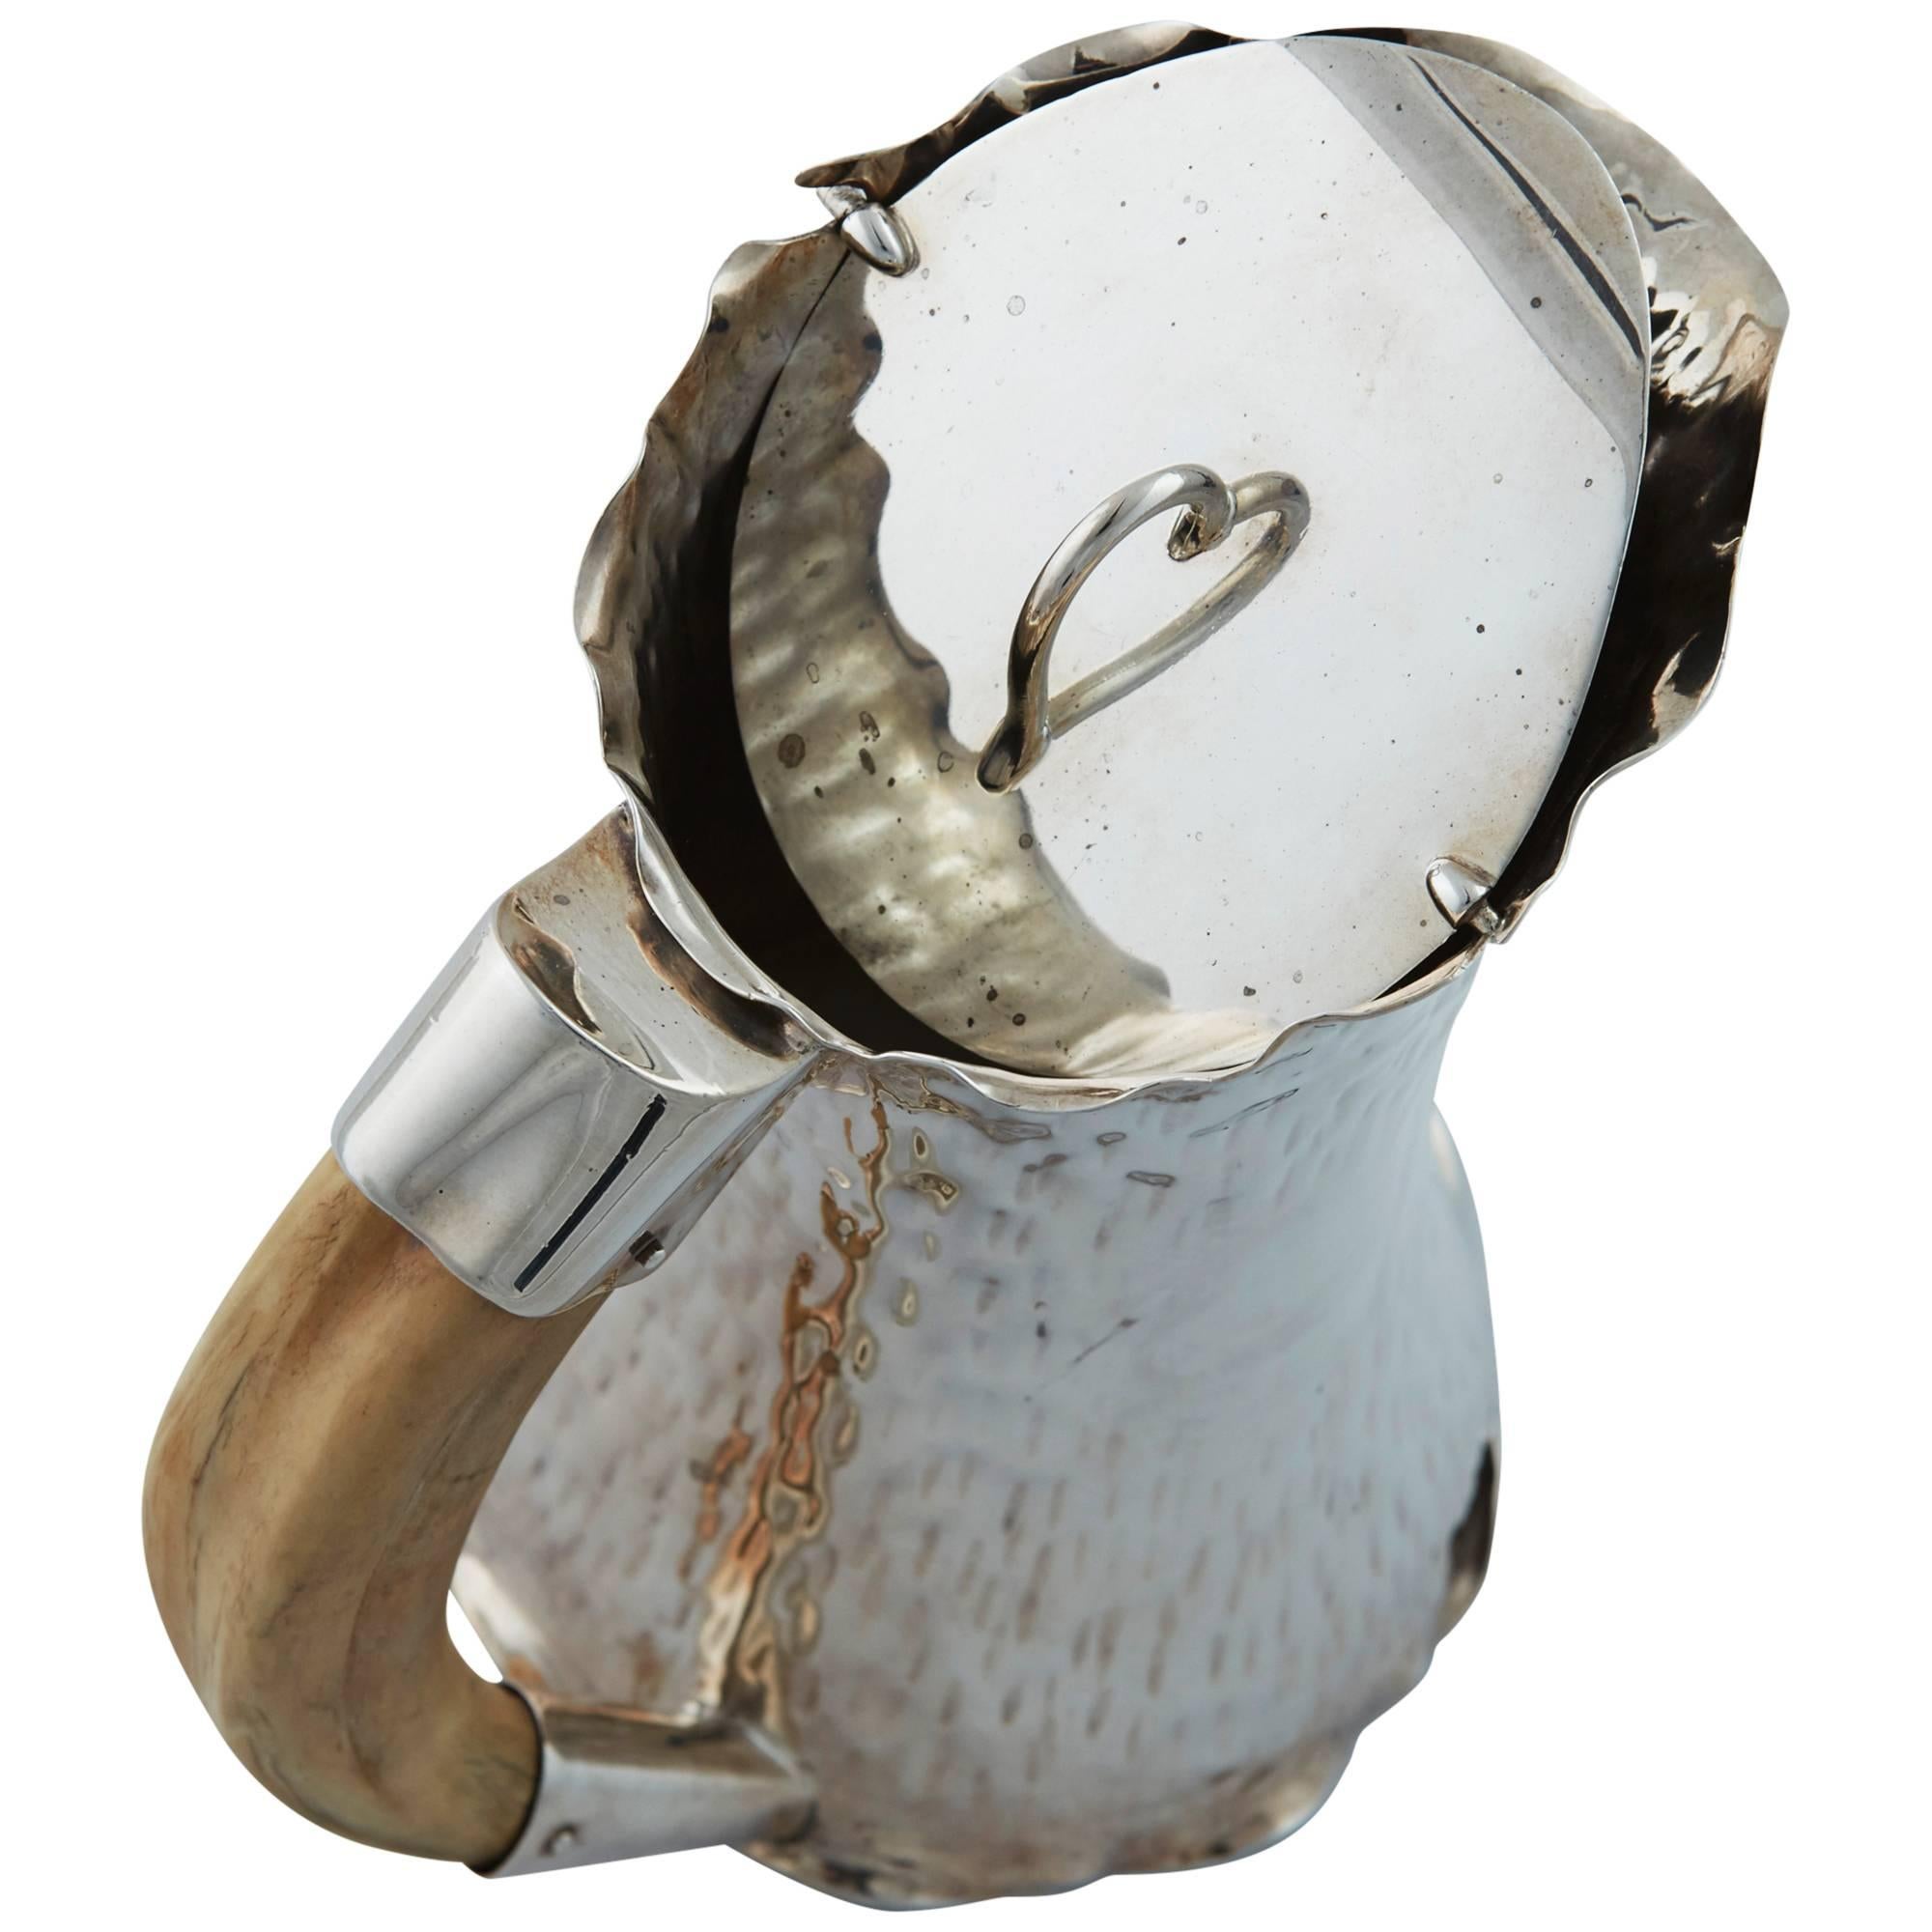 Large hammered silver plated pitcher with boars tooth handle, English, c1900. The handle is reinforced with silver on both top and bottom for extra stability.  